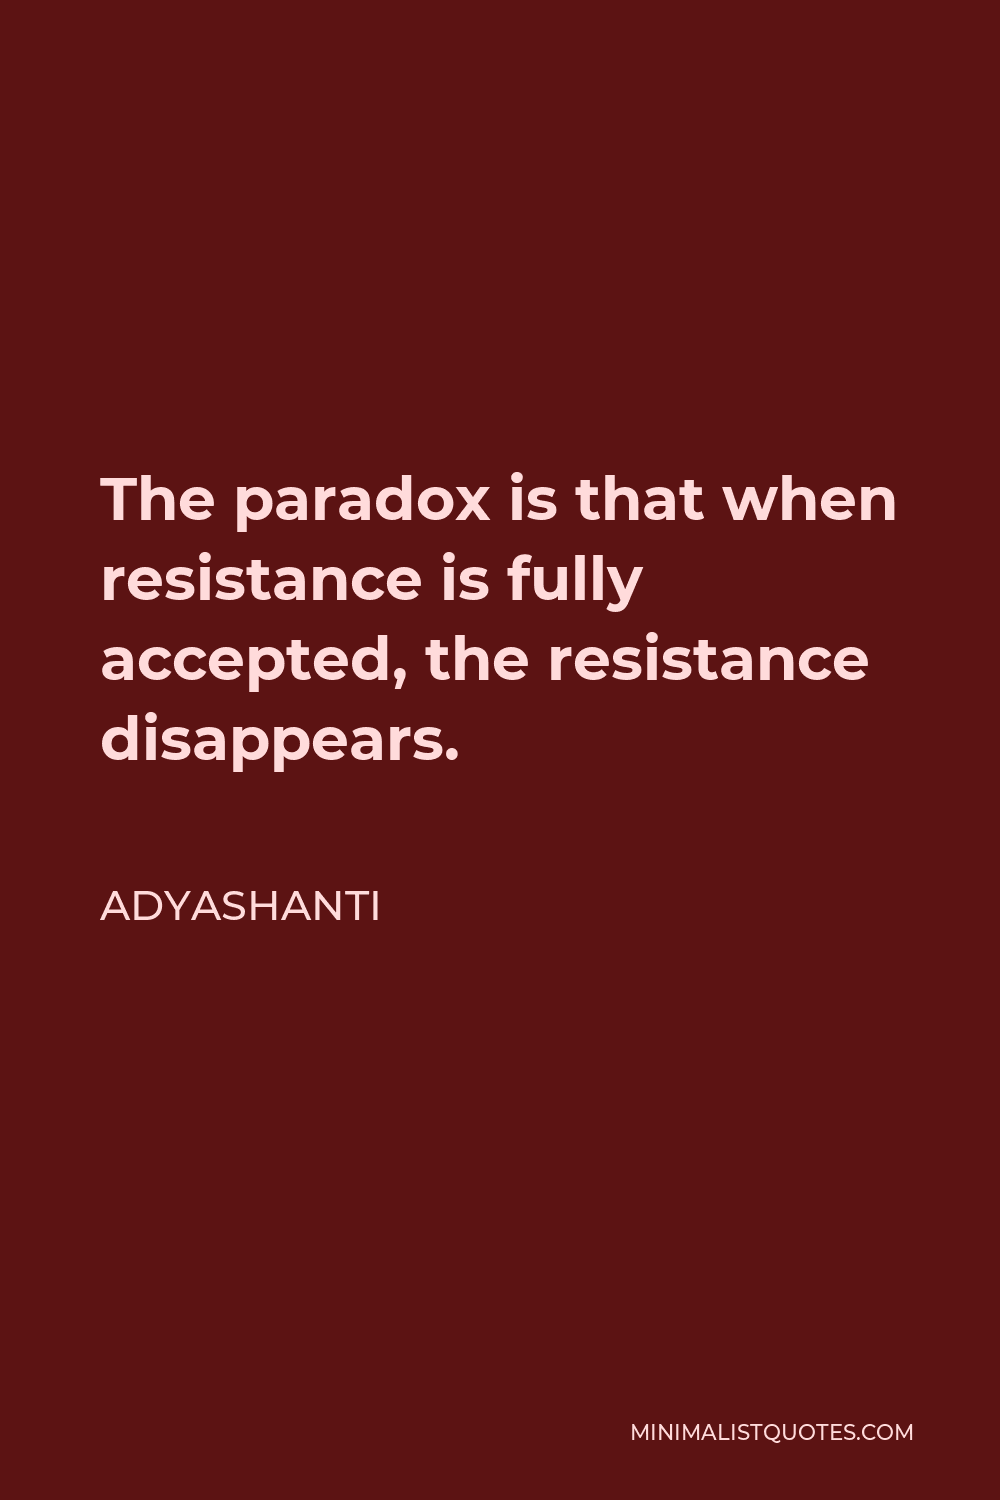 Adyashanti Quote - The paradox is that when resistance is fully accepted, the resistance disappears.